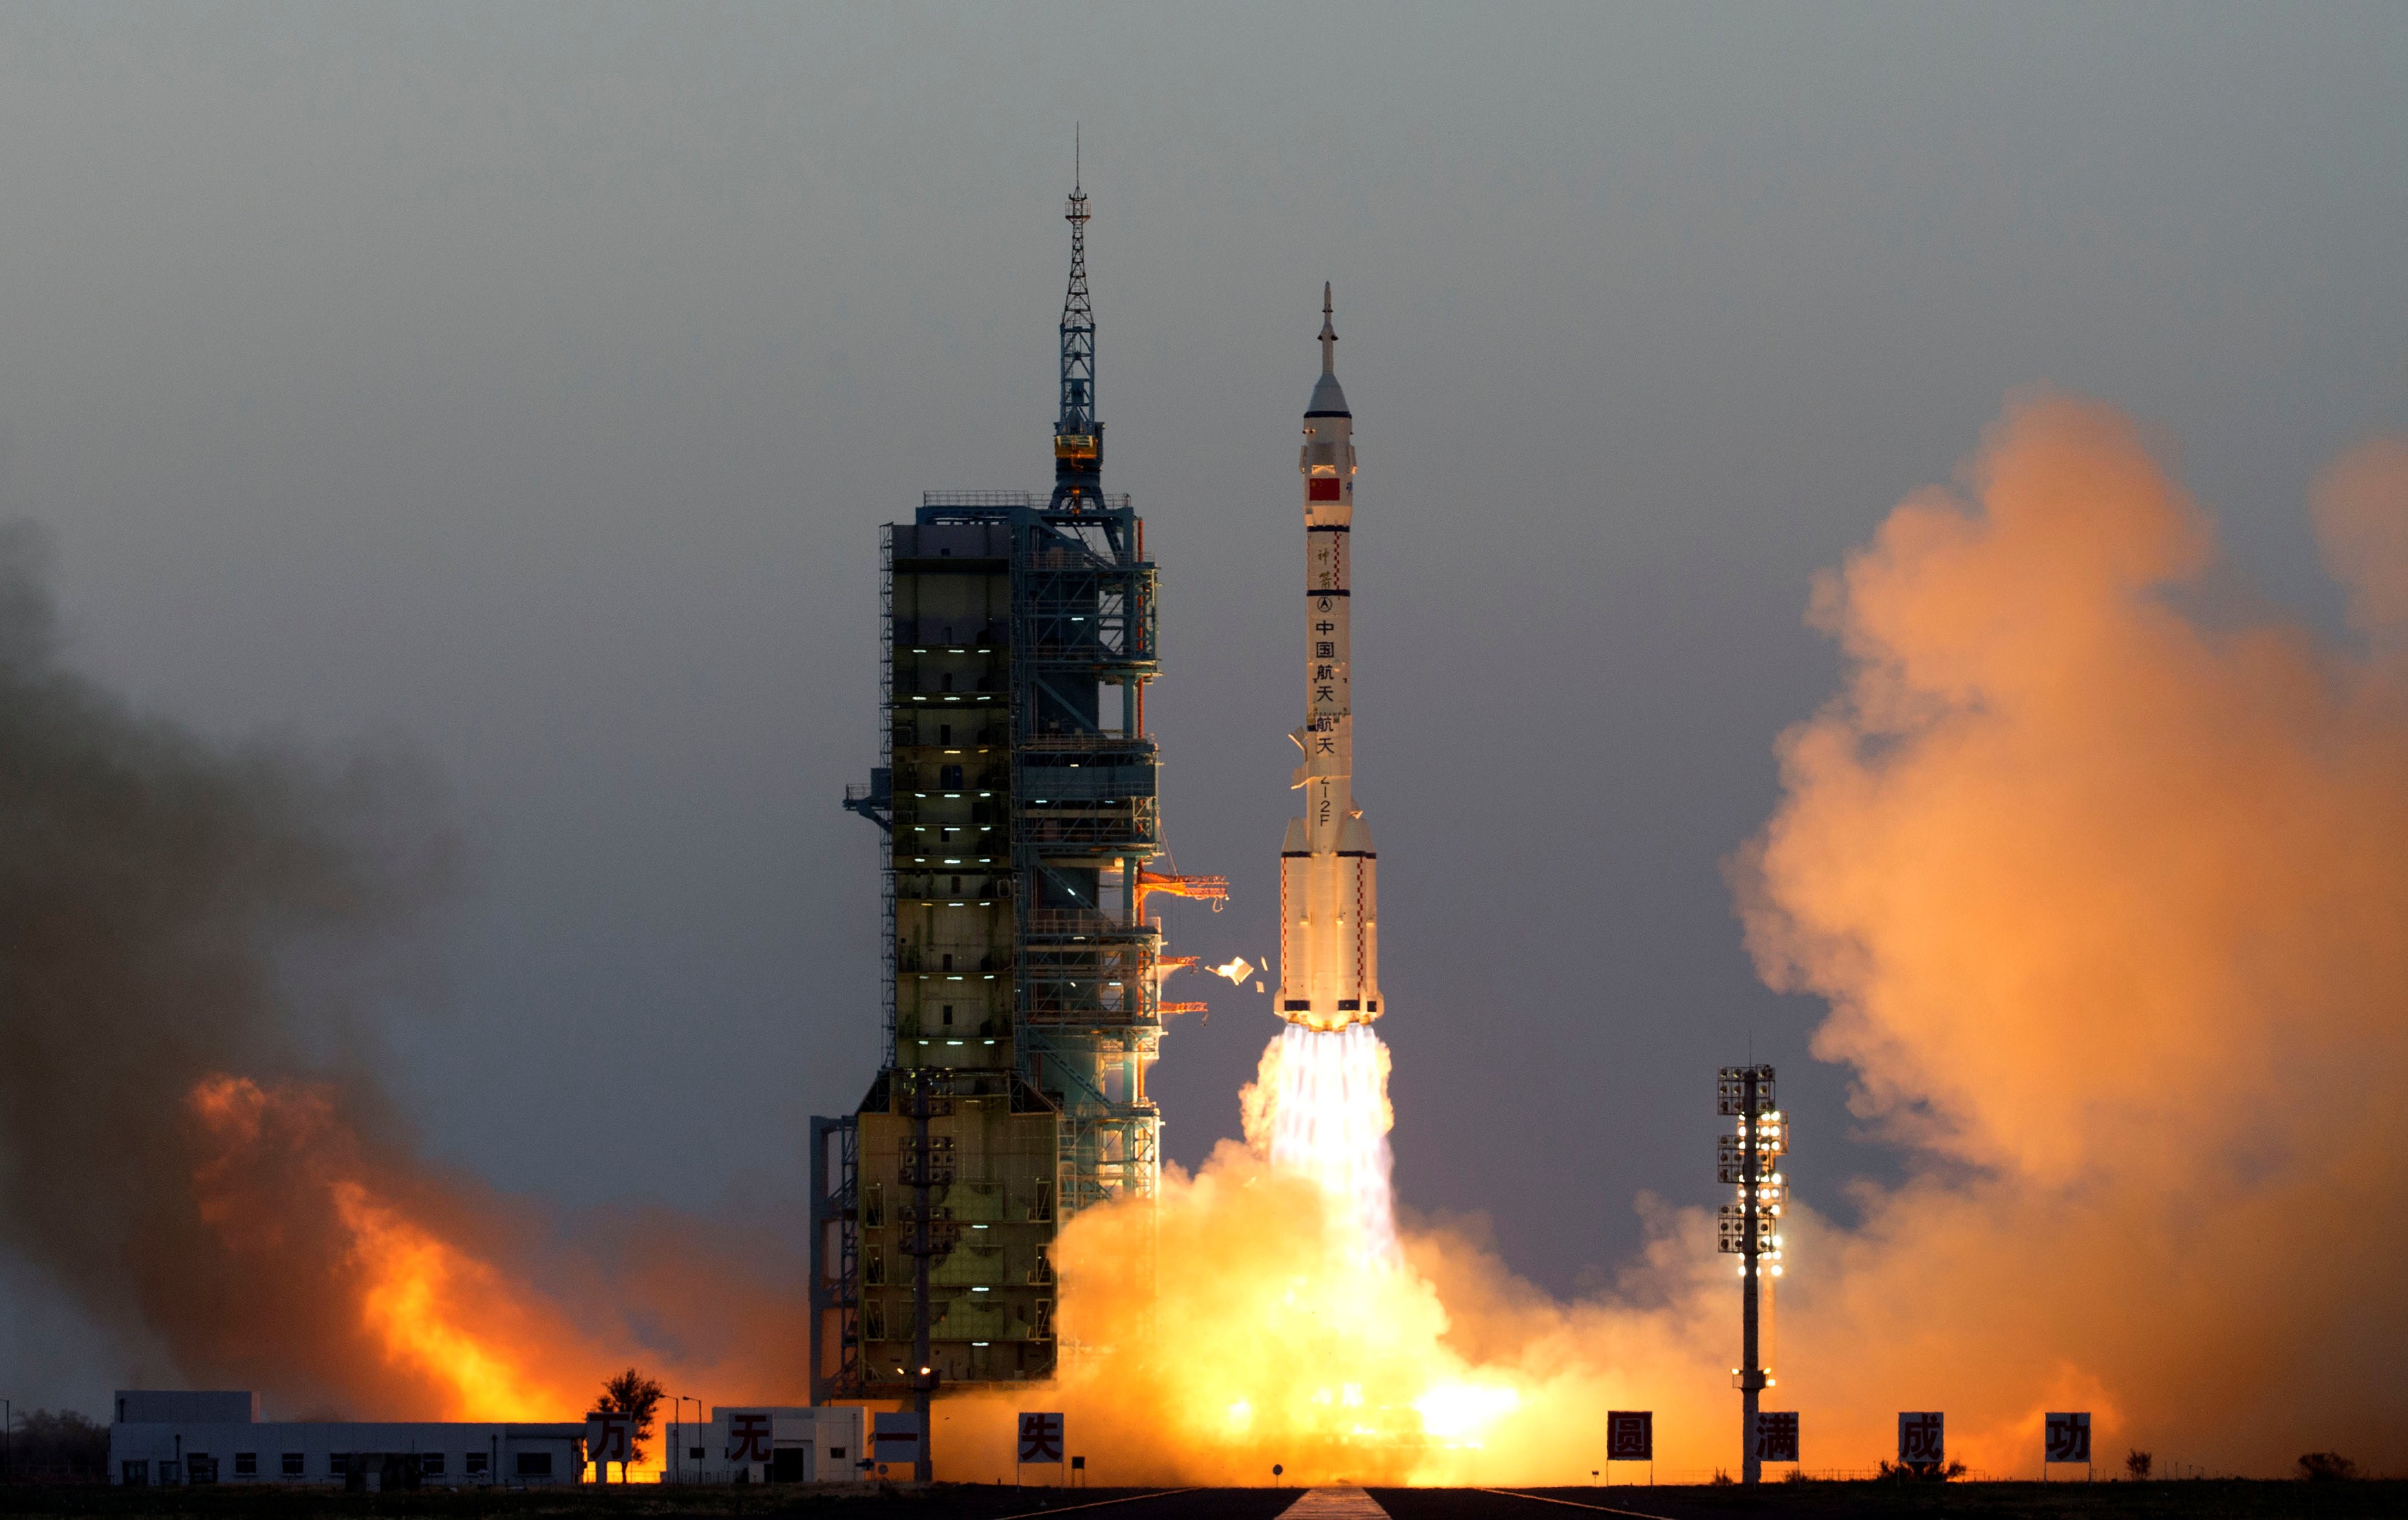 The Shenzhou-11 spacecraft carrying astronauts Jing Haipeng and Chen Dong and six silkworms blasts off from the launch pad in the Gobi Desert. Photo: Reuters